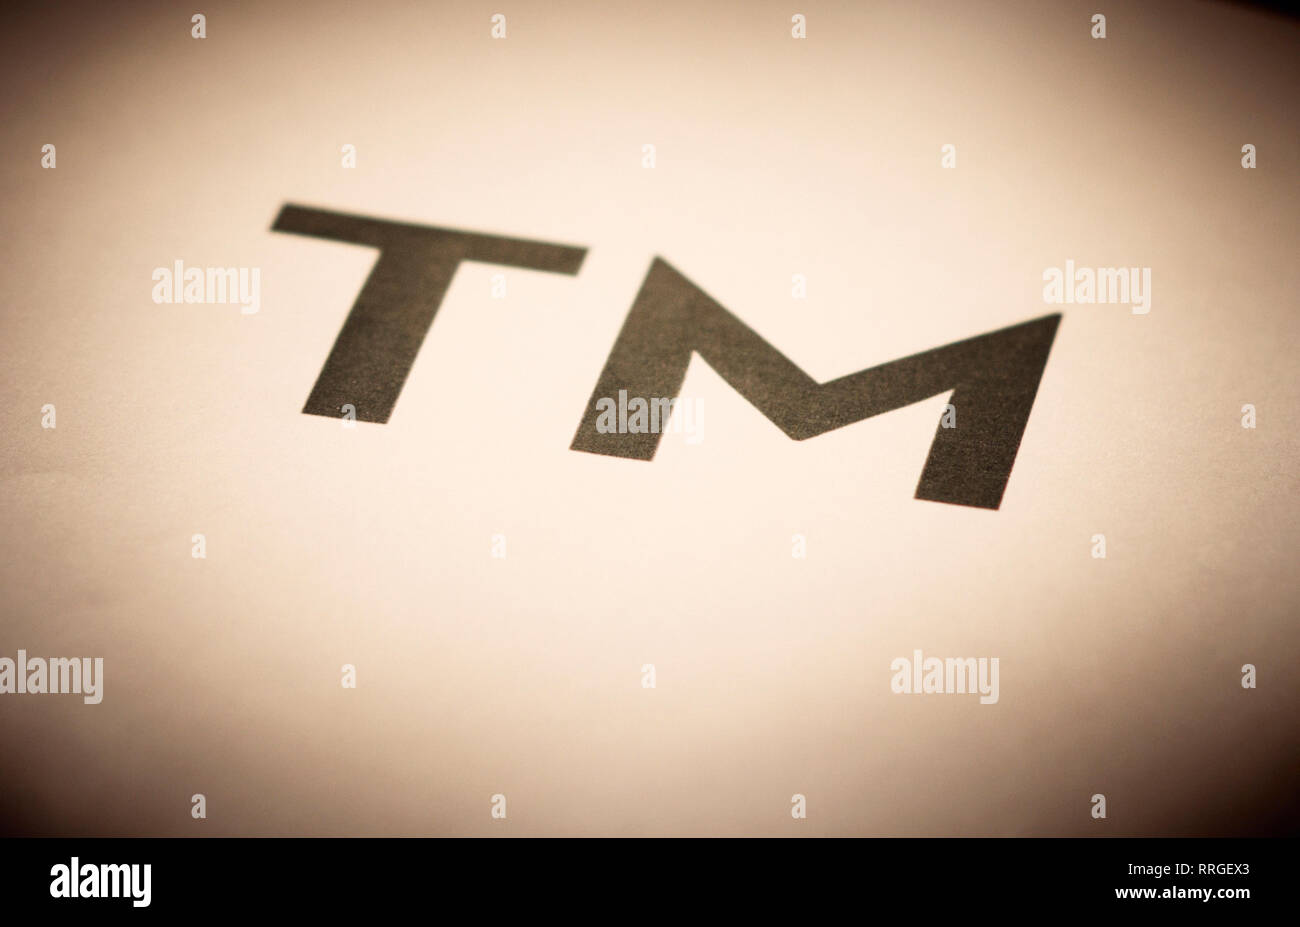 TM symbol known as a trademark is a symbol to indicate that the preceding mark is a trademark. It is usually used for unregistered trademarks. Stock Photo